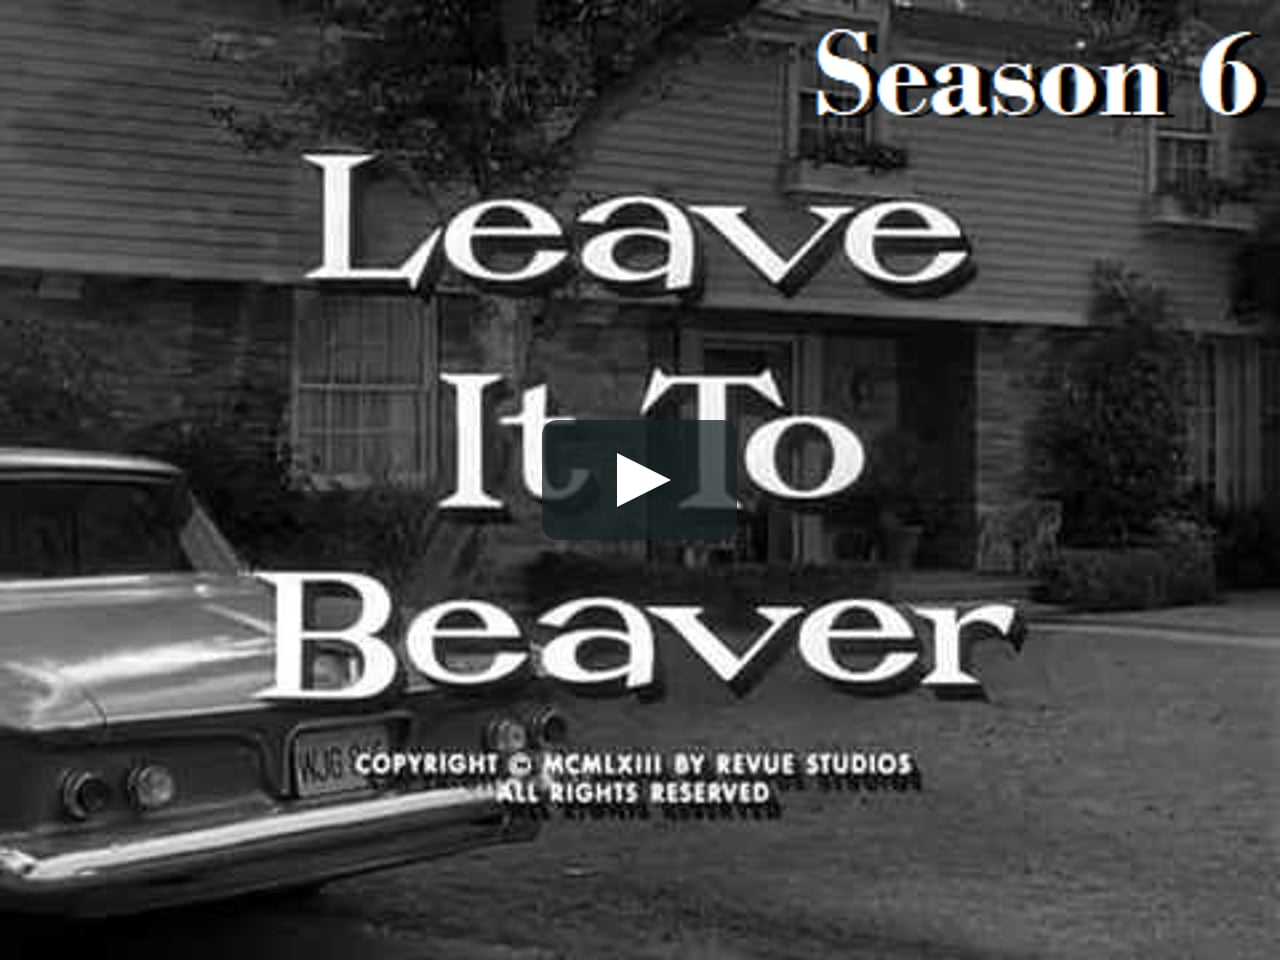 new leave it to beaver